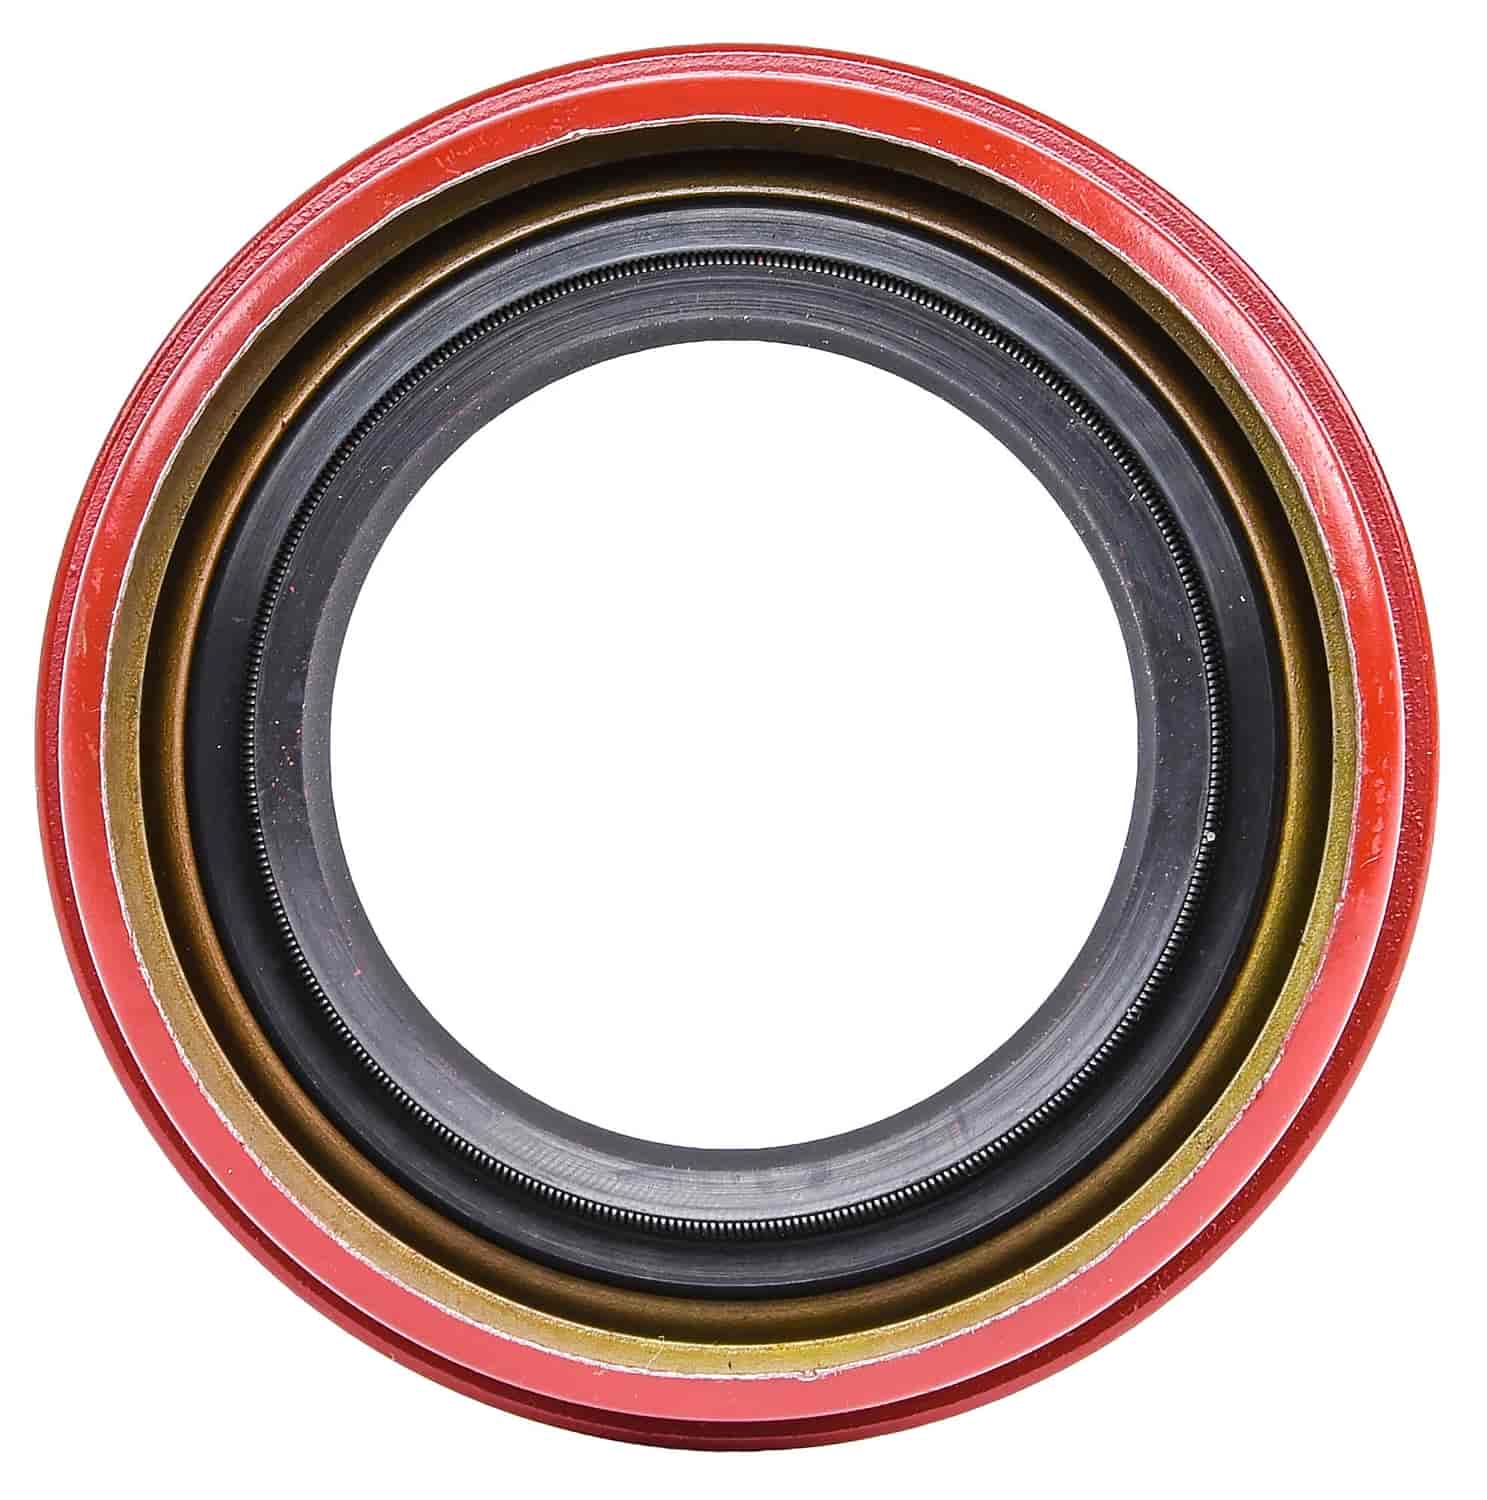 Transmission Tailshaft Rear Seal for GM TH-350, Powerglide,